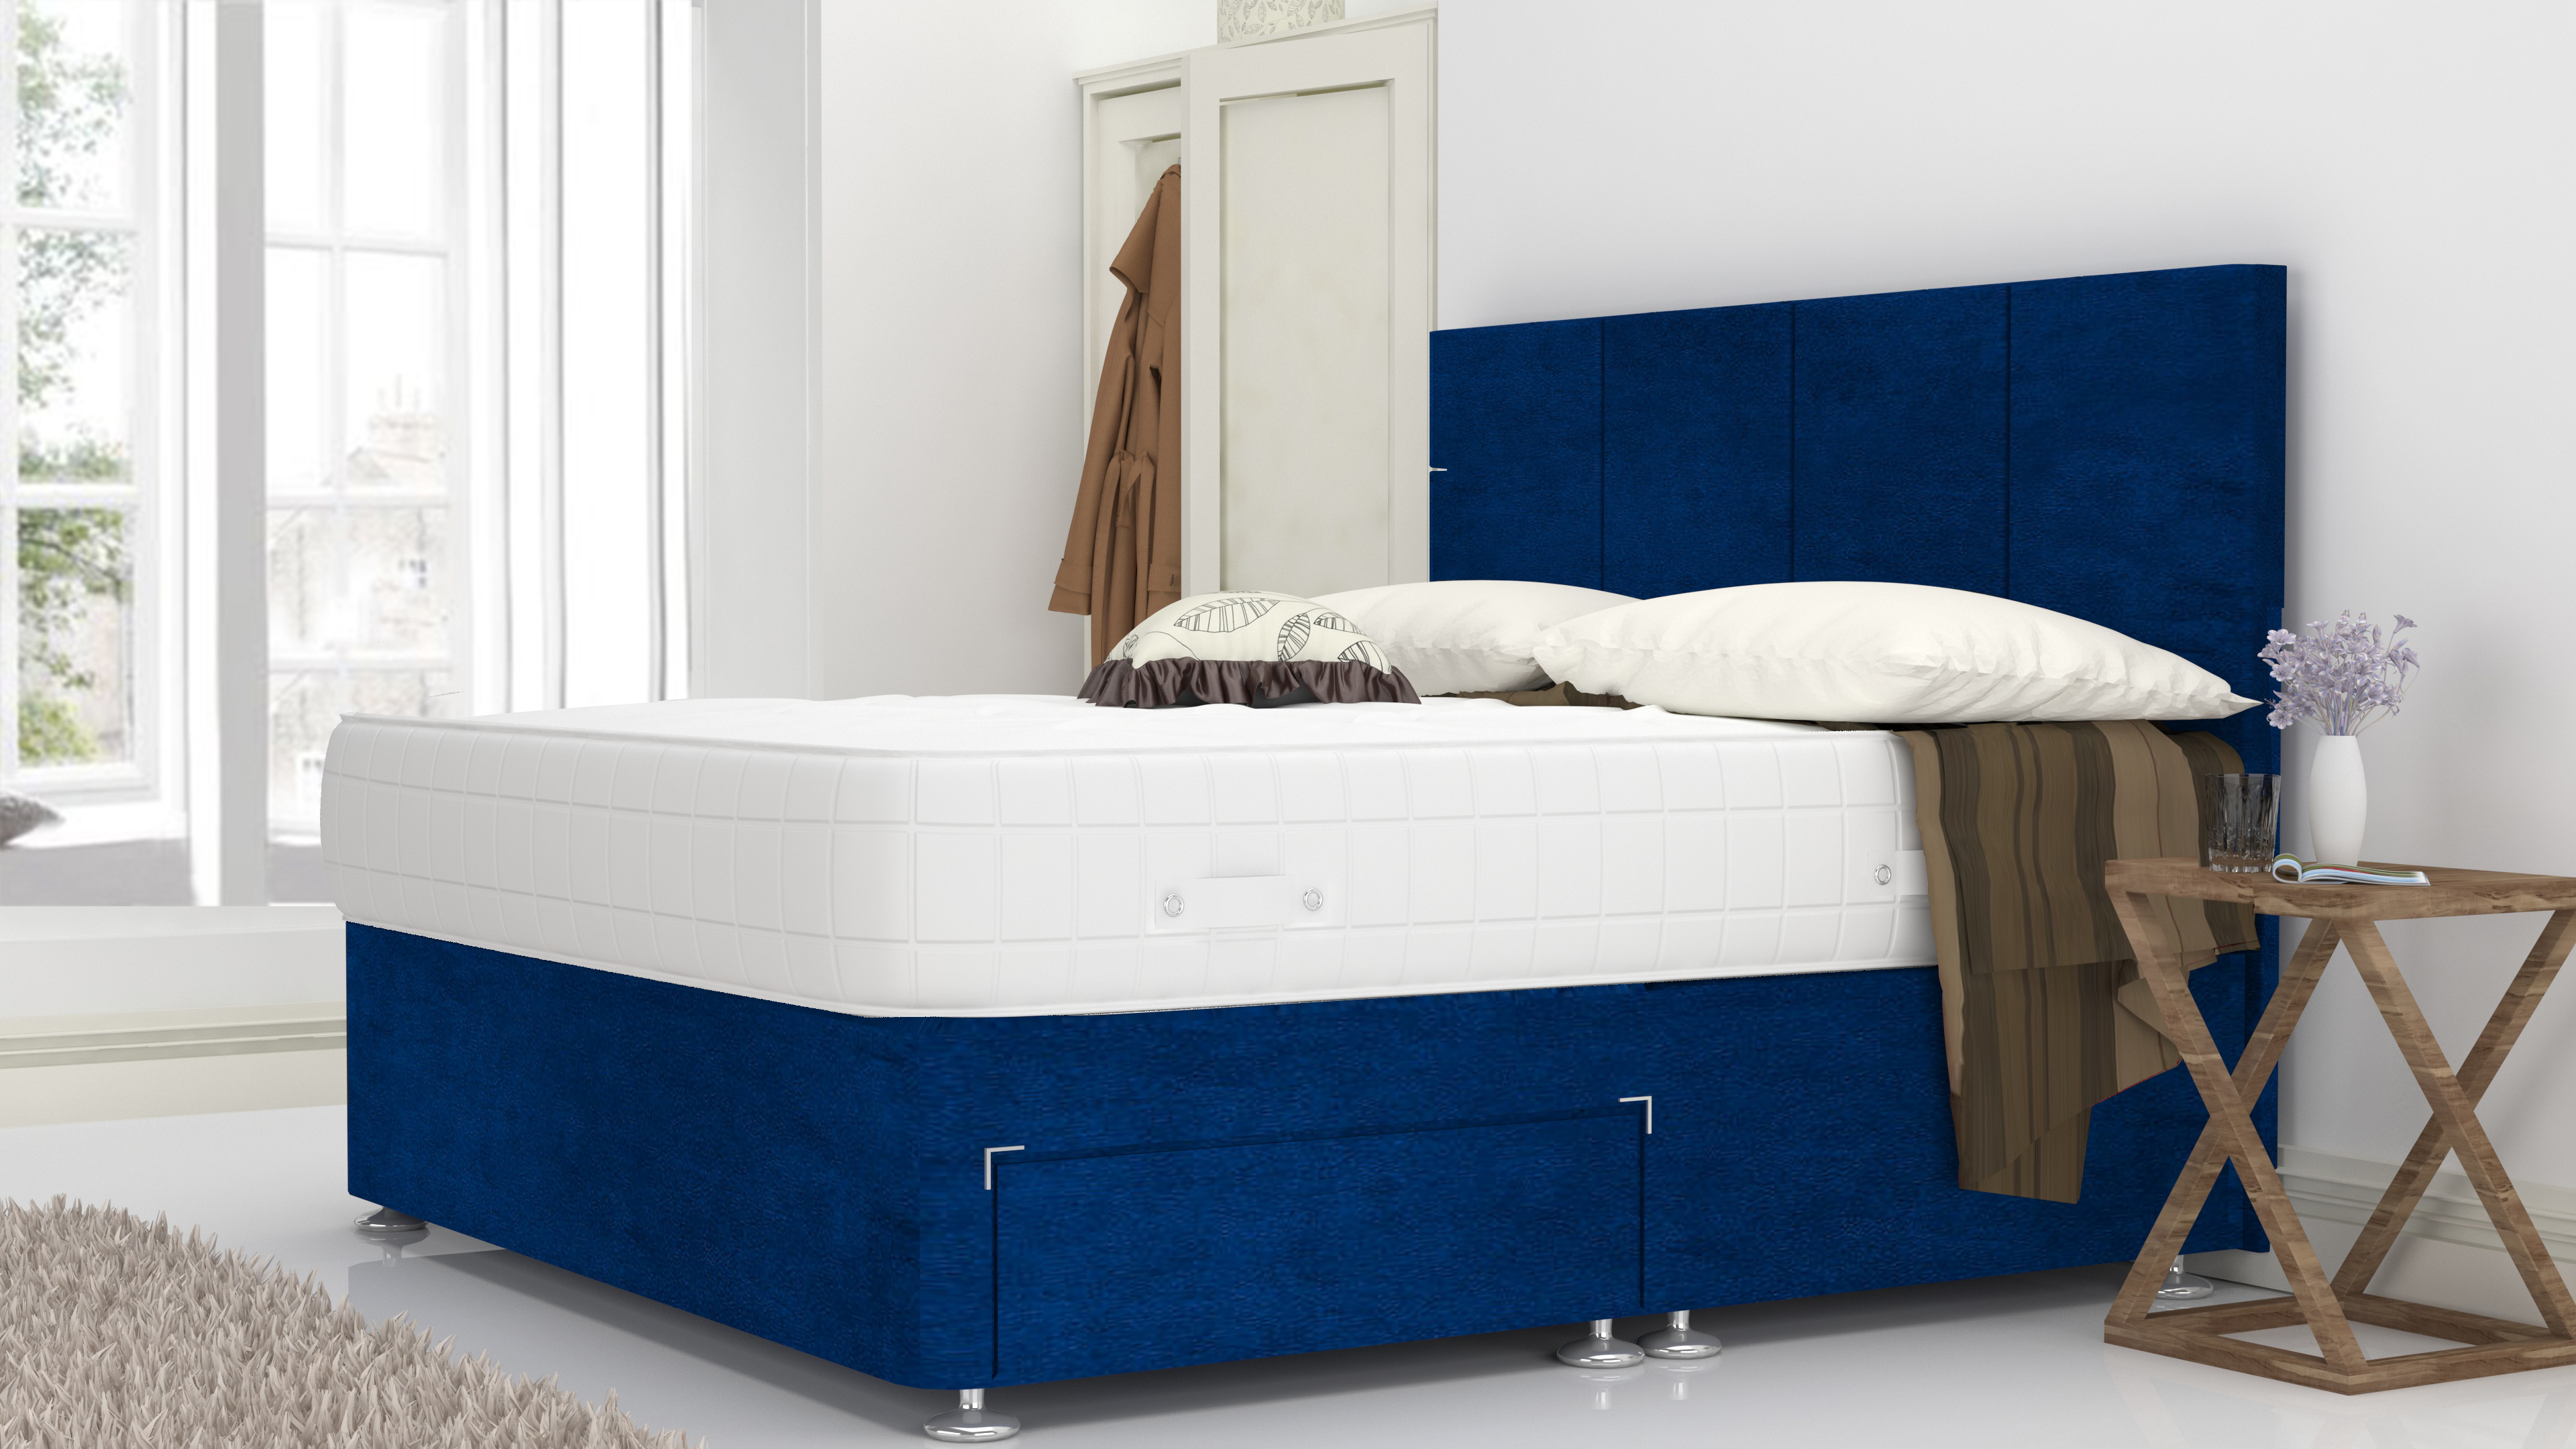 Blue Plush 4 Feet Divan Bed Set With 4 Panel Headboard (Included Feet) And Free Tinsel Top Mattress